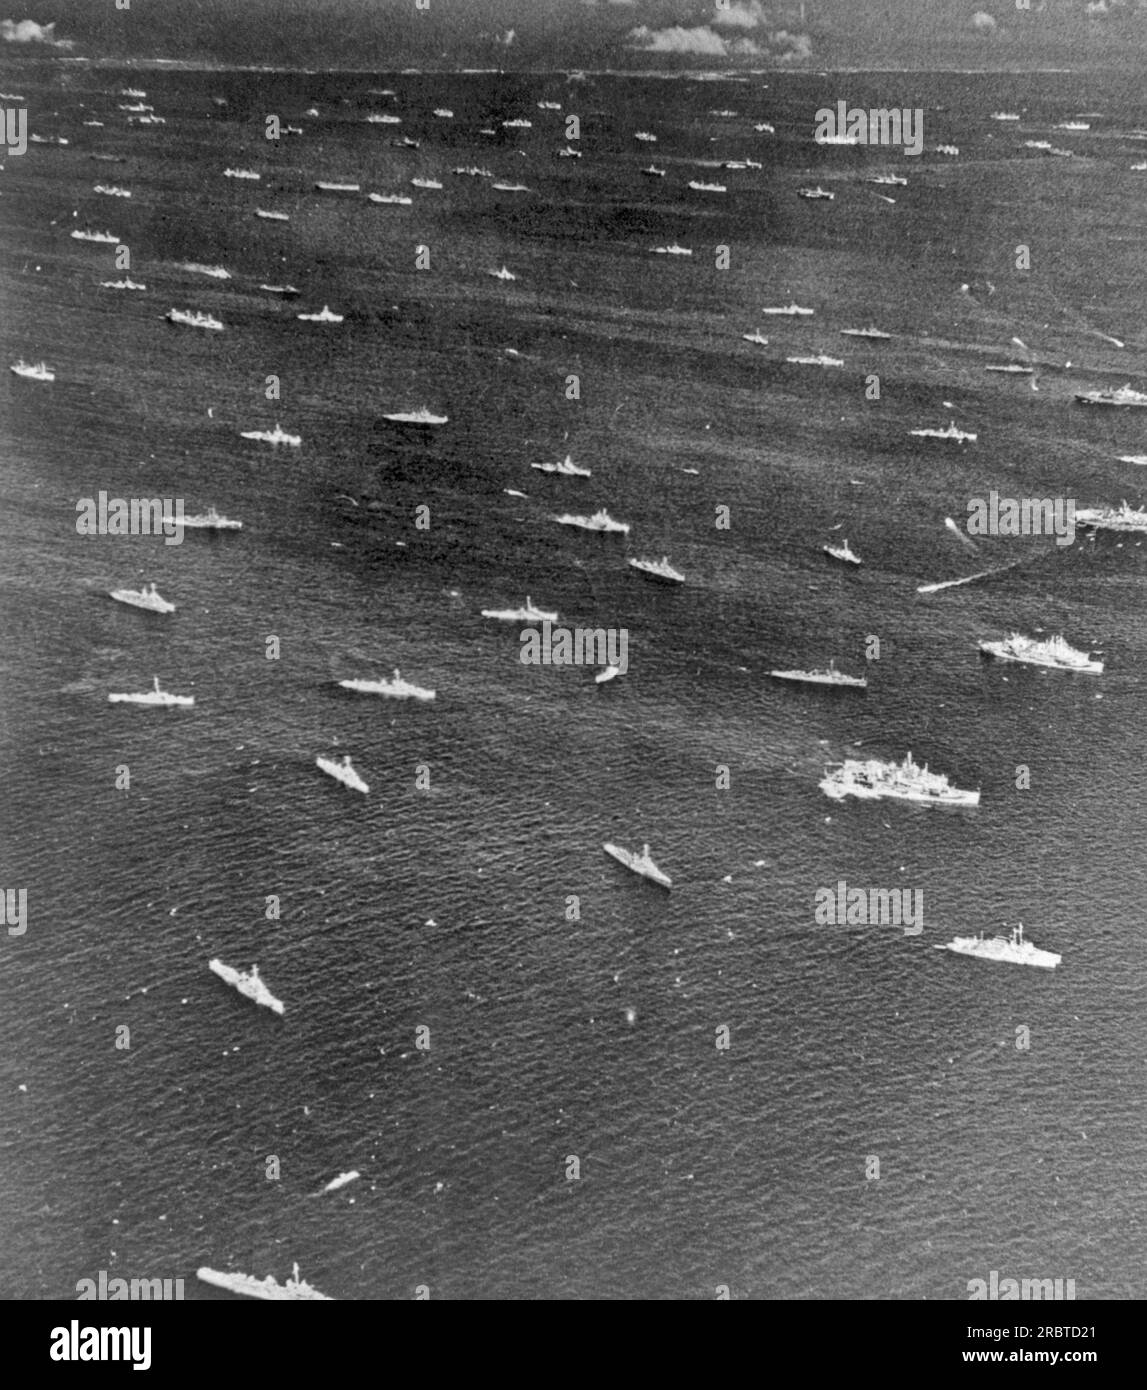 Pacific Ocean:   April, 1945 A U. S. Navy Task Force with nearly every kind of combat ship shown at anchor. In the foreground are destroyers and destroyer escorts, to the right are transports. In upper third are tankers, Essex class carriers, Independence class light carriers, more tankers, and cargo ships. Stock Photo